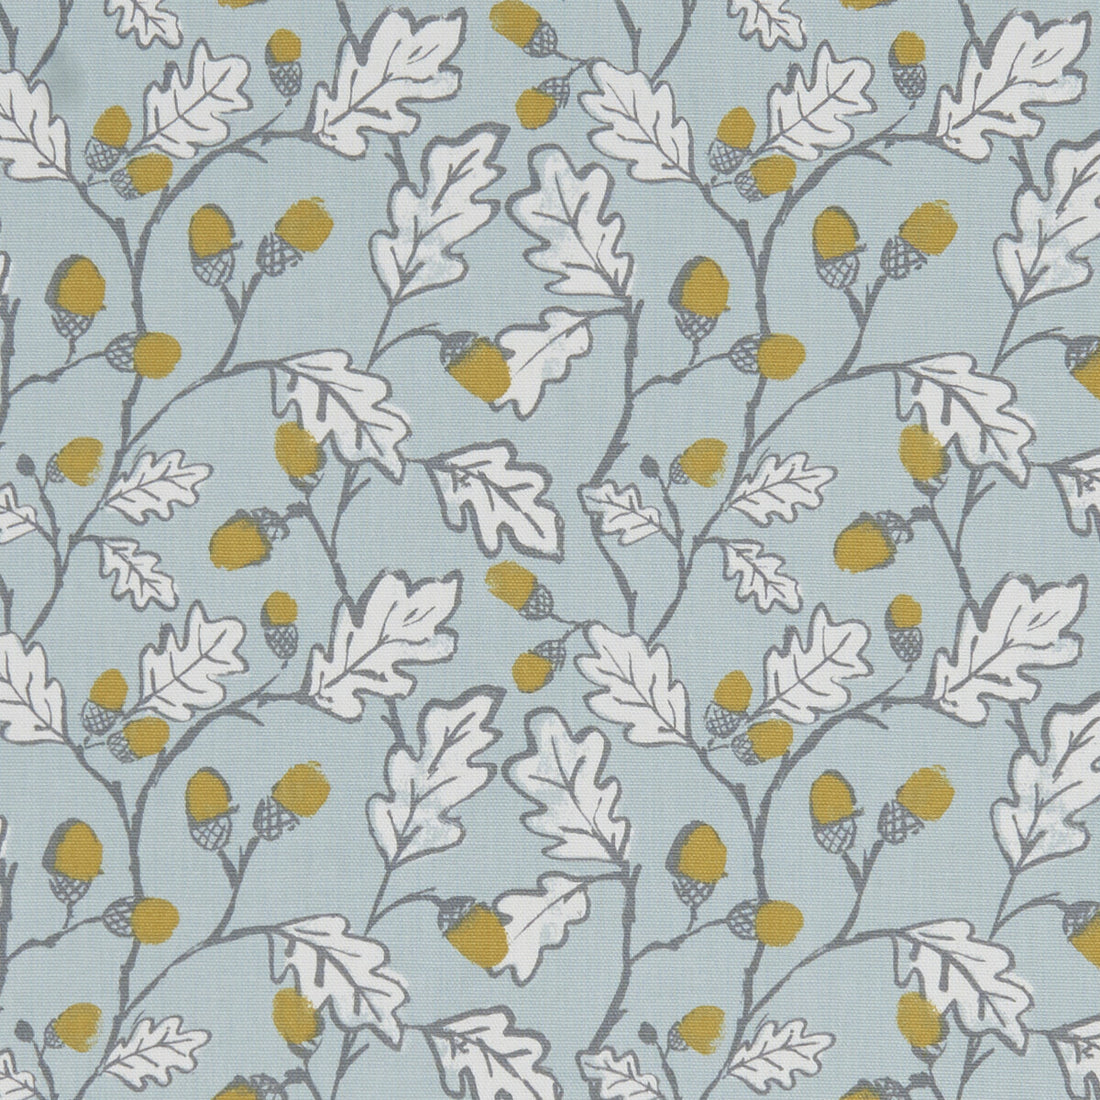 Acorn Trail fabric in duckegg color - pattern F1182/01.CAC.0 - by Clarke And Clarke in the Land &amp; Sea By Studio G For C&amp;C collection